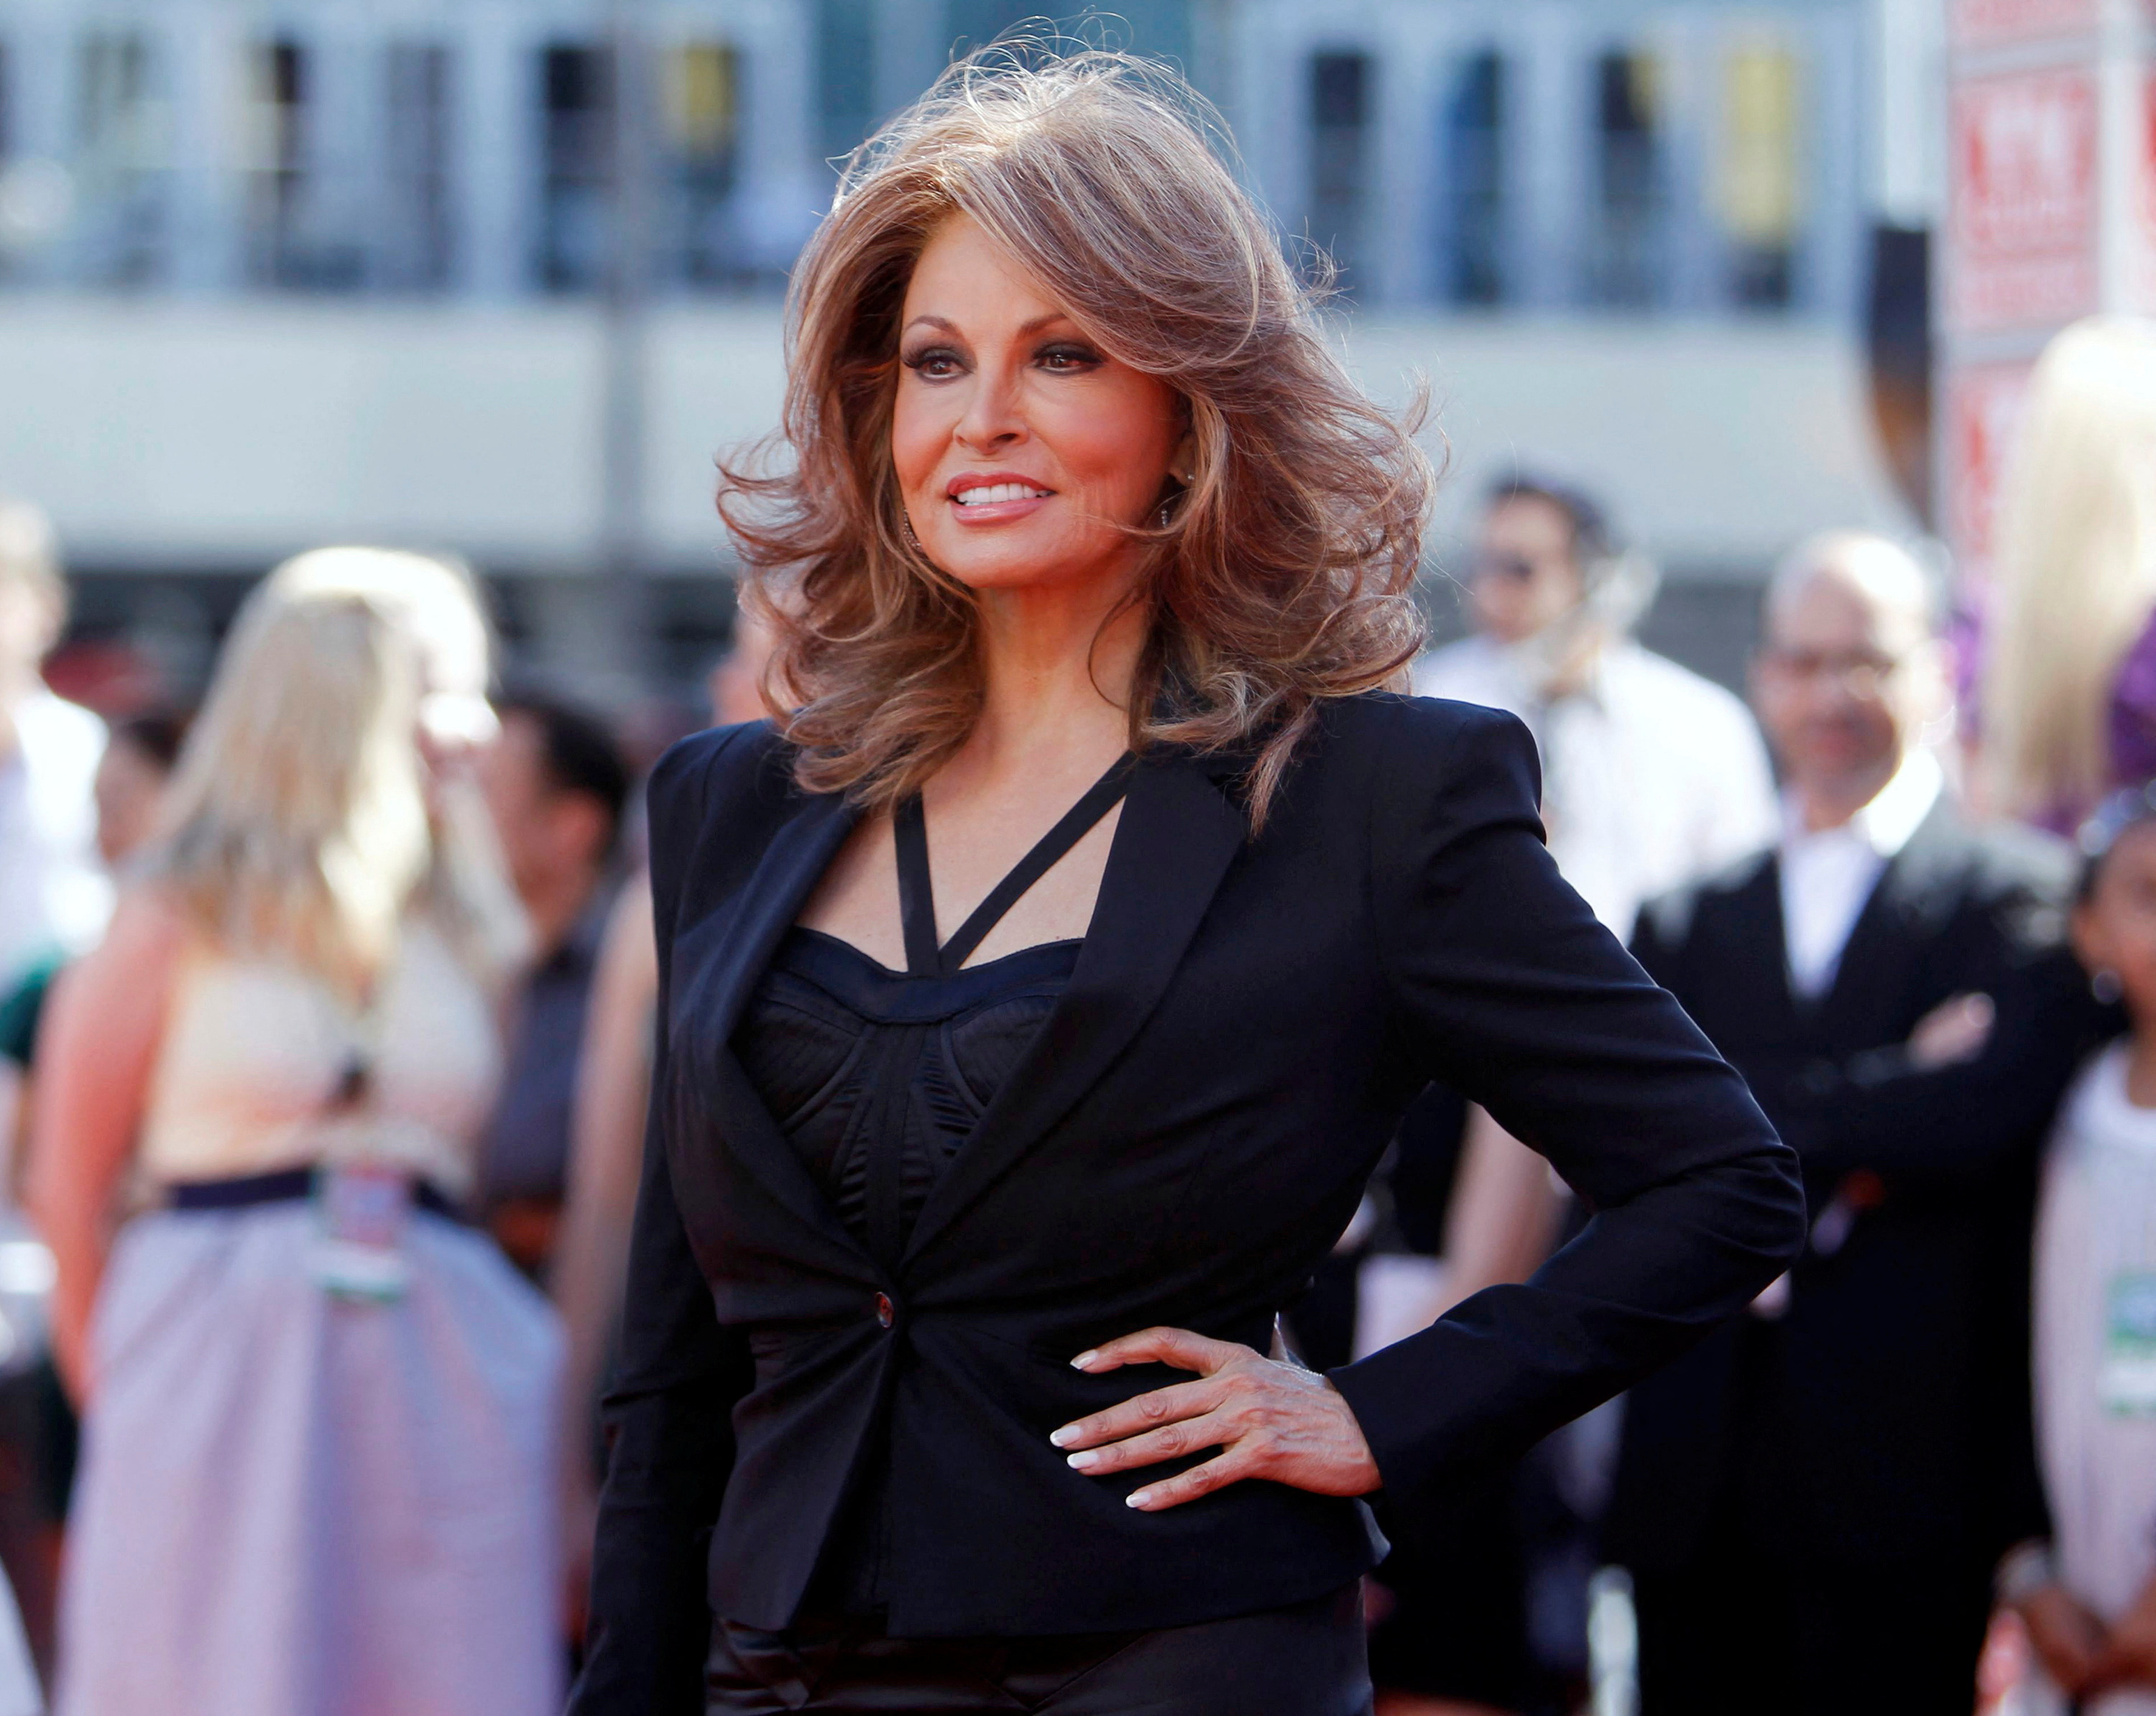 Actress Raquel Welch arrives for the 9th season finale of 'American Idol' in Los Angeles